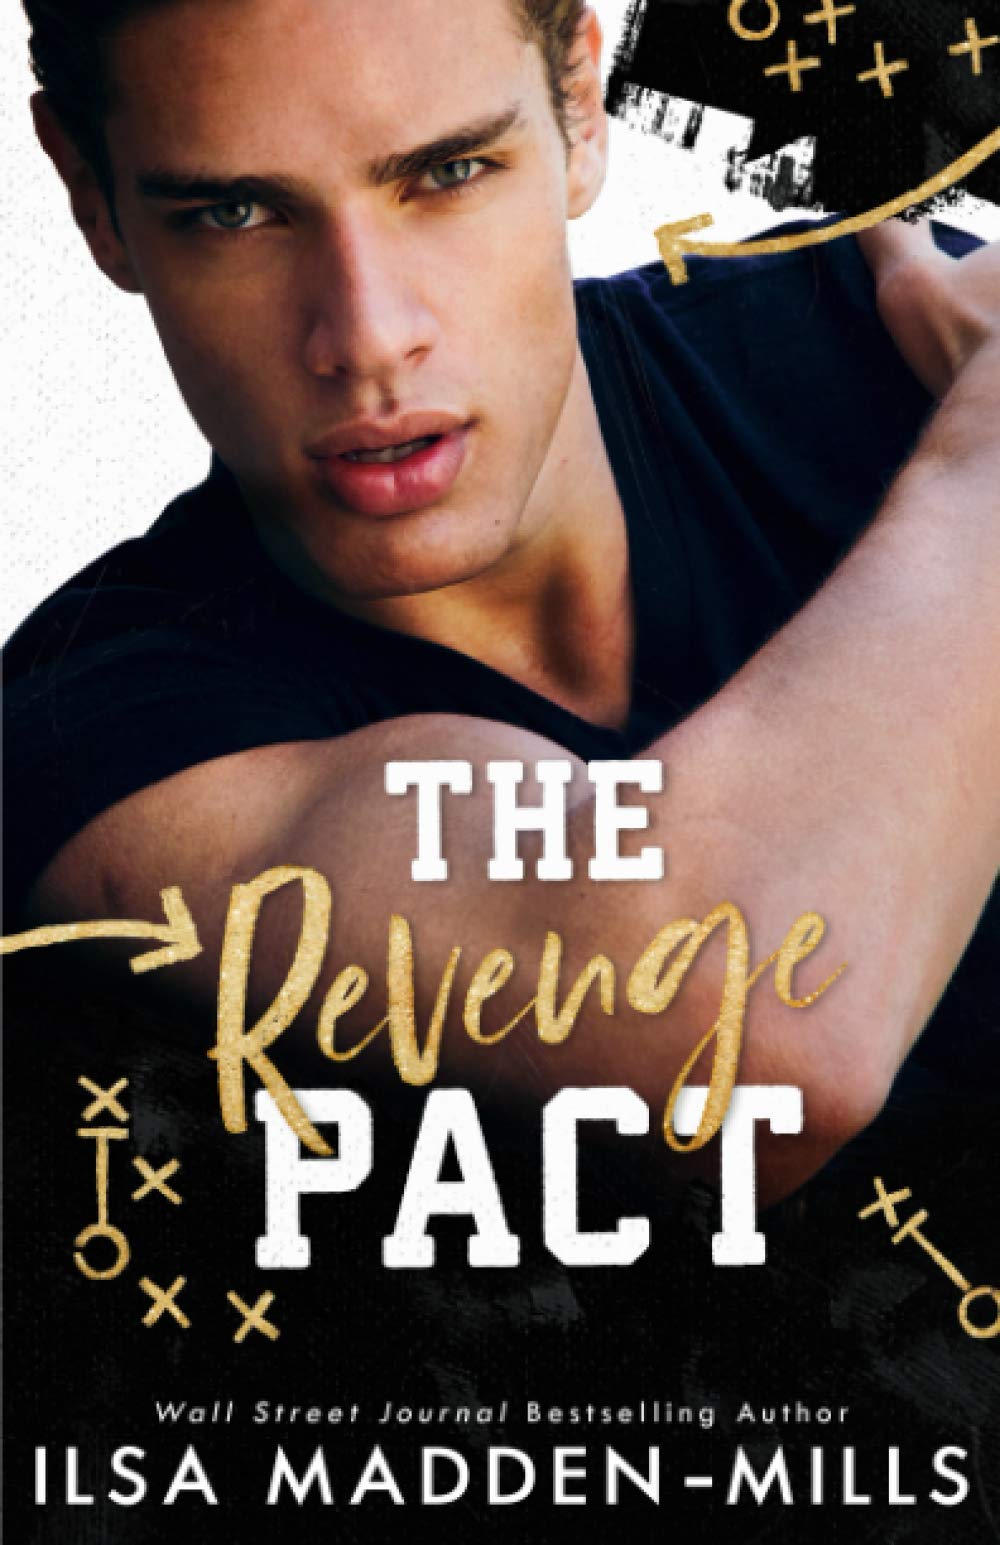 [EPUB] Kings of Football #1 The Revenge Pact by Ilsa Madden-Mills